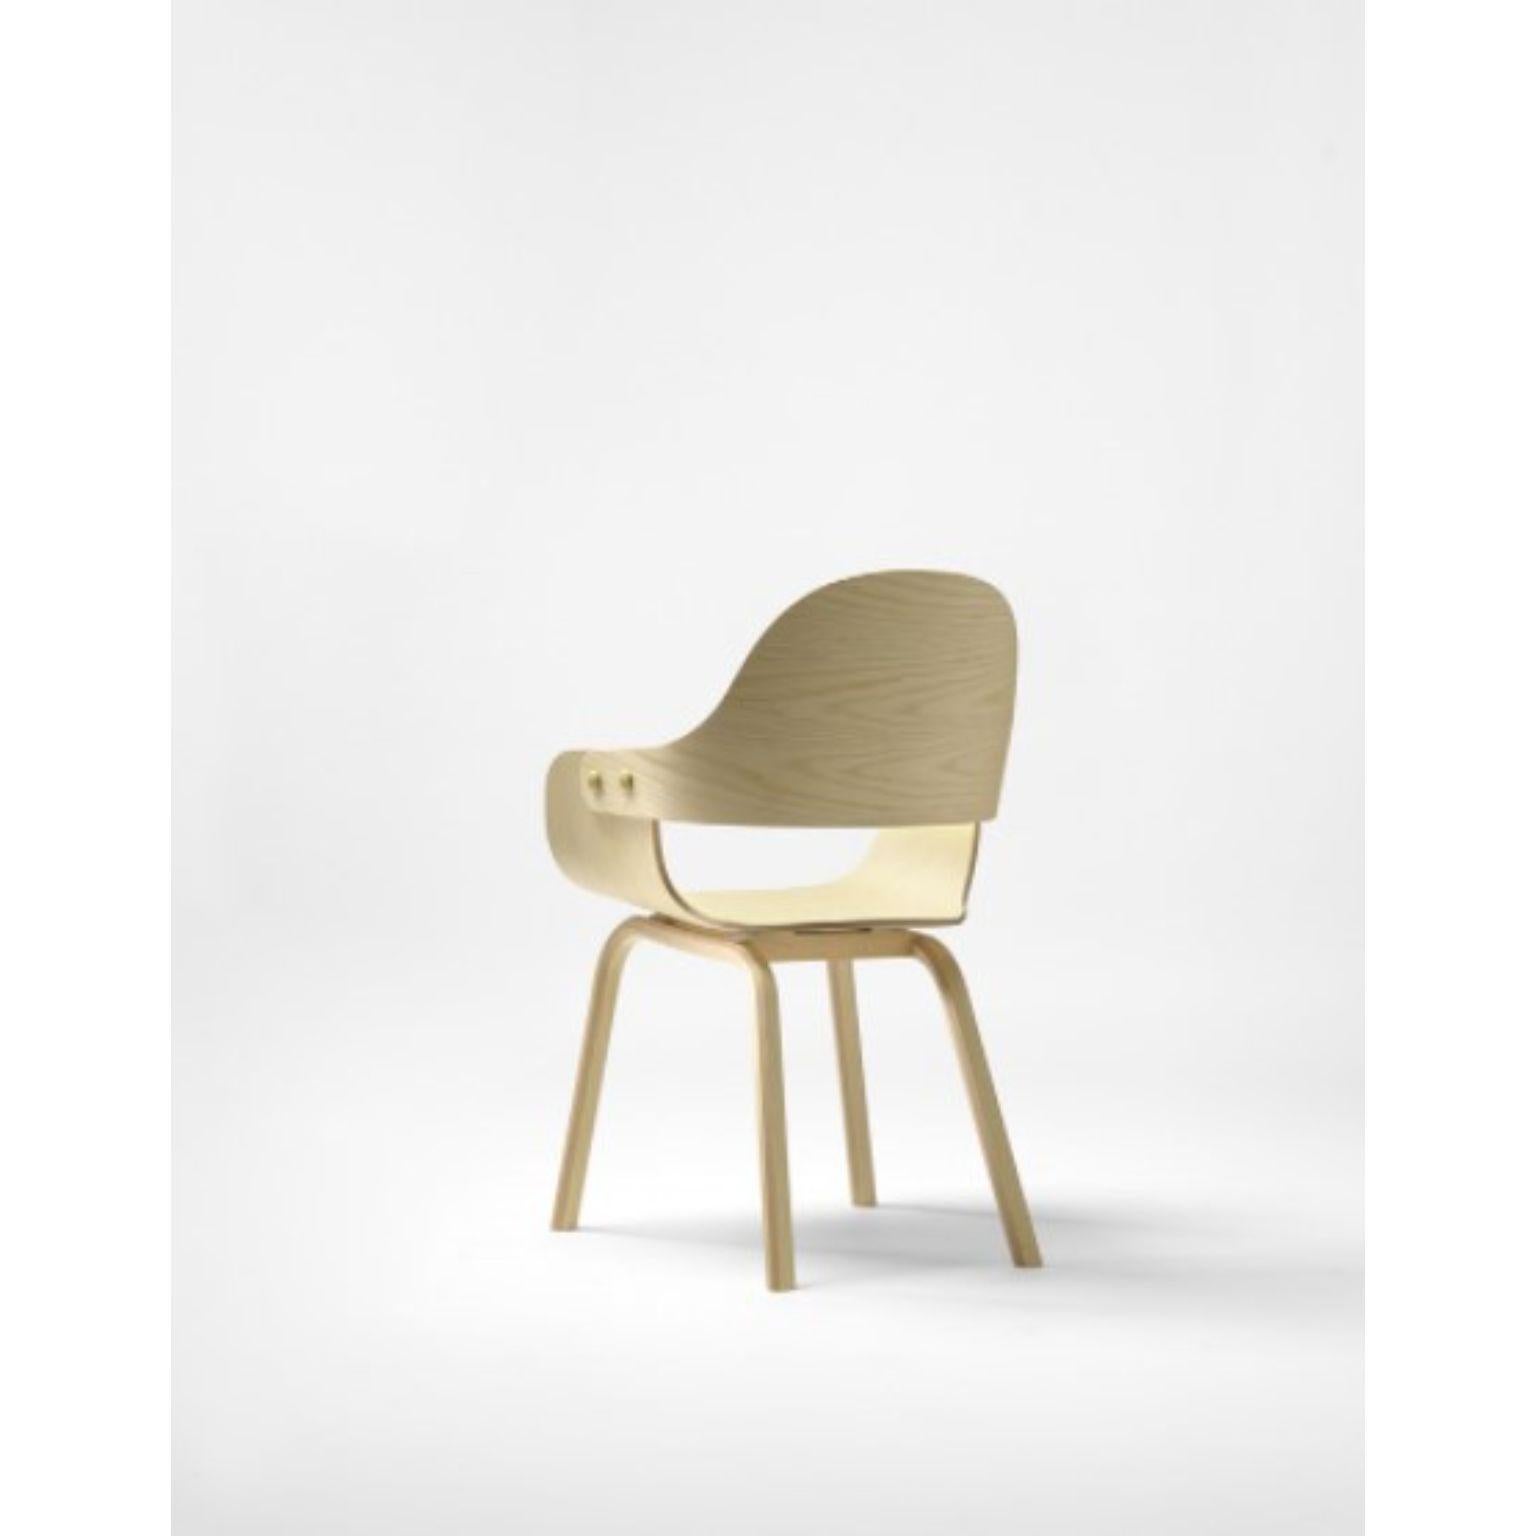 Showtime Nude 4 legs chair by Jaime Hayon
Dimensions: D 55 x W 55 x H 86 cm 
Materials: Powder-coated steel or aluminum structure. Legs, seat, and backrest in plywood with exteriors in natural ash, walnut, or ash stained black. Metallic decorative